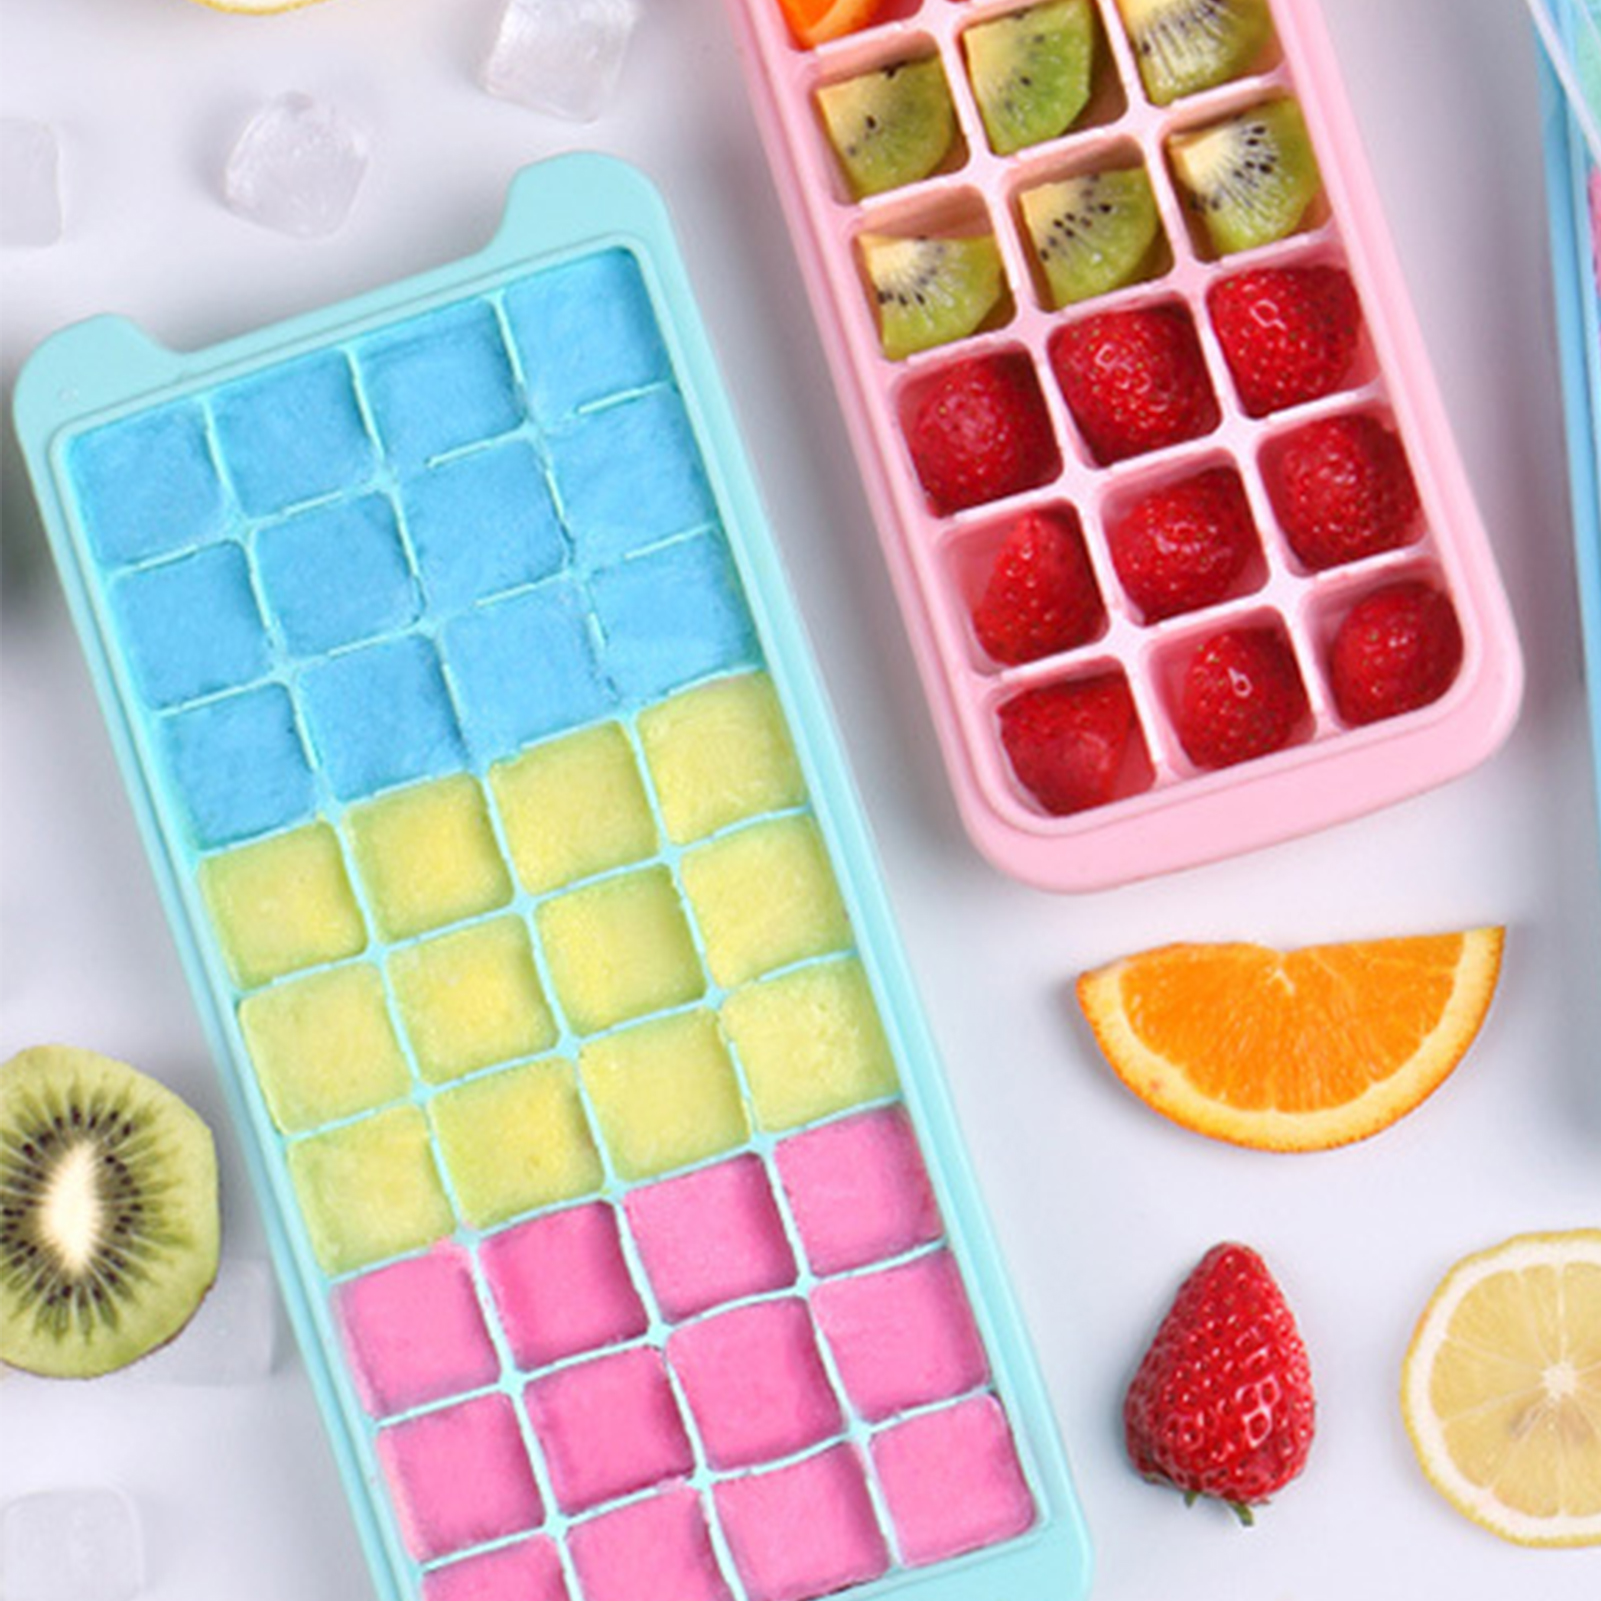 Ice Cube Trays,Ice Tray Food Grade Flexible Silicone Ice Cube Tray Molds with Lids, Easy Release Ice Trays Make 24/36 Ice Cube, Stackable Dishwasher Safe - image 4 of 8